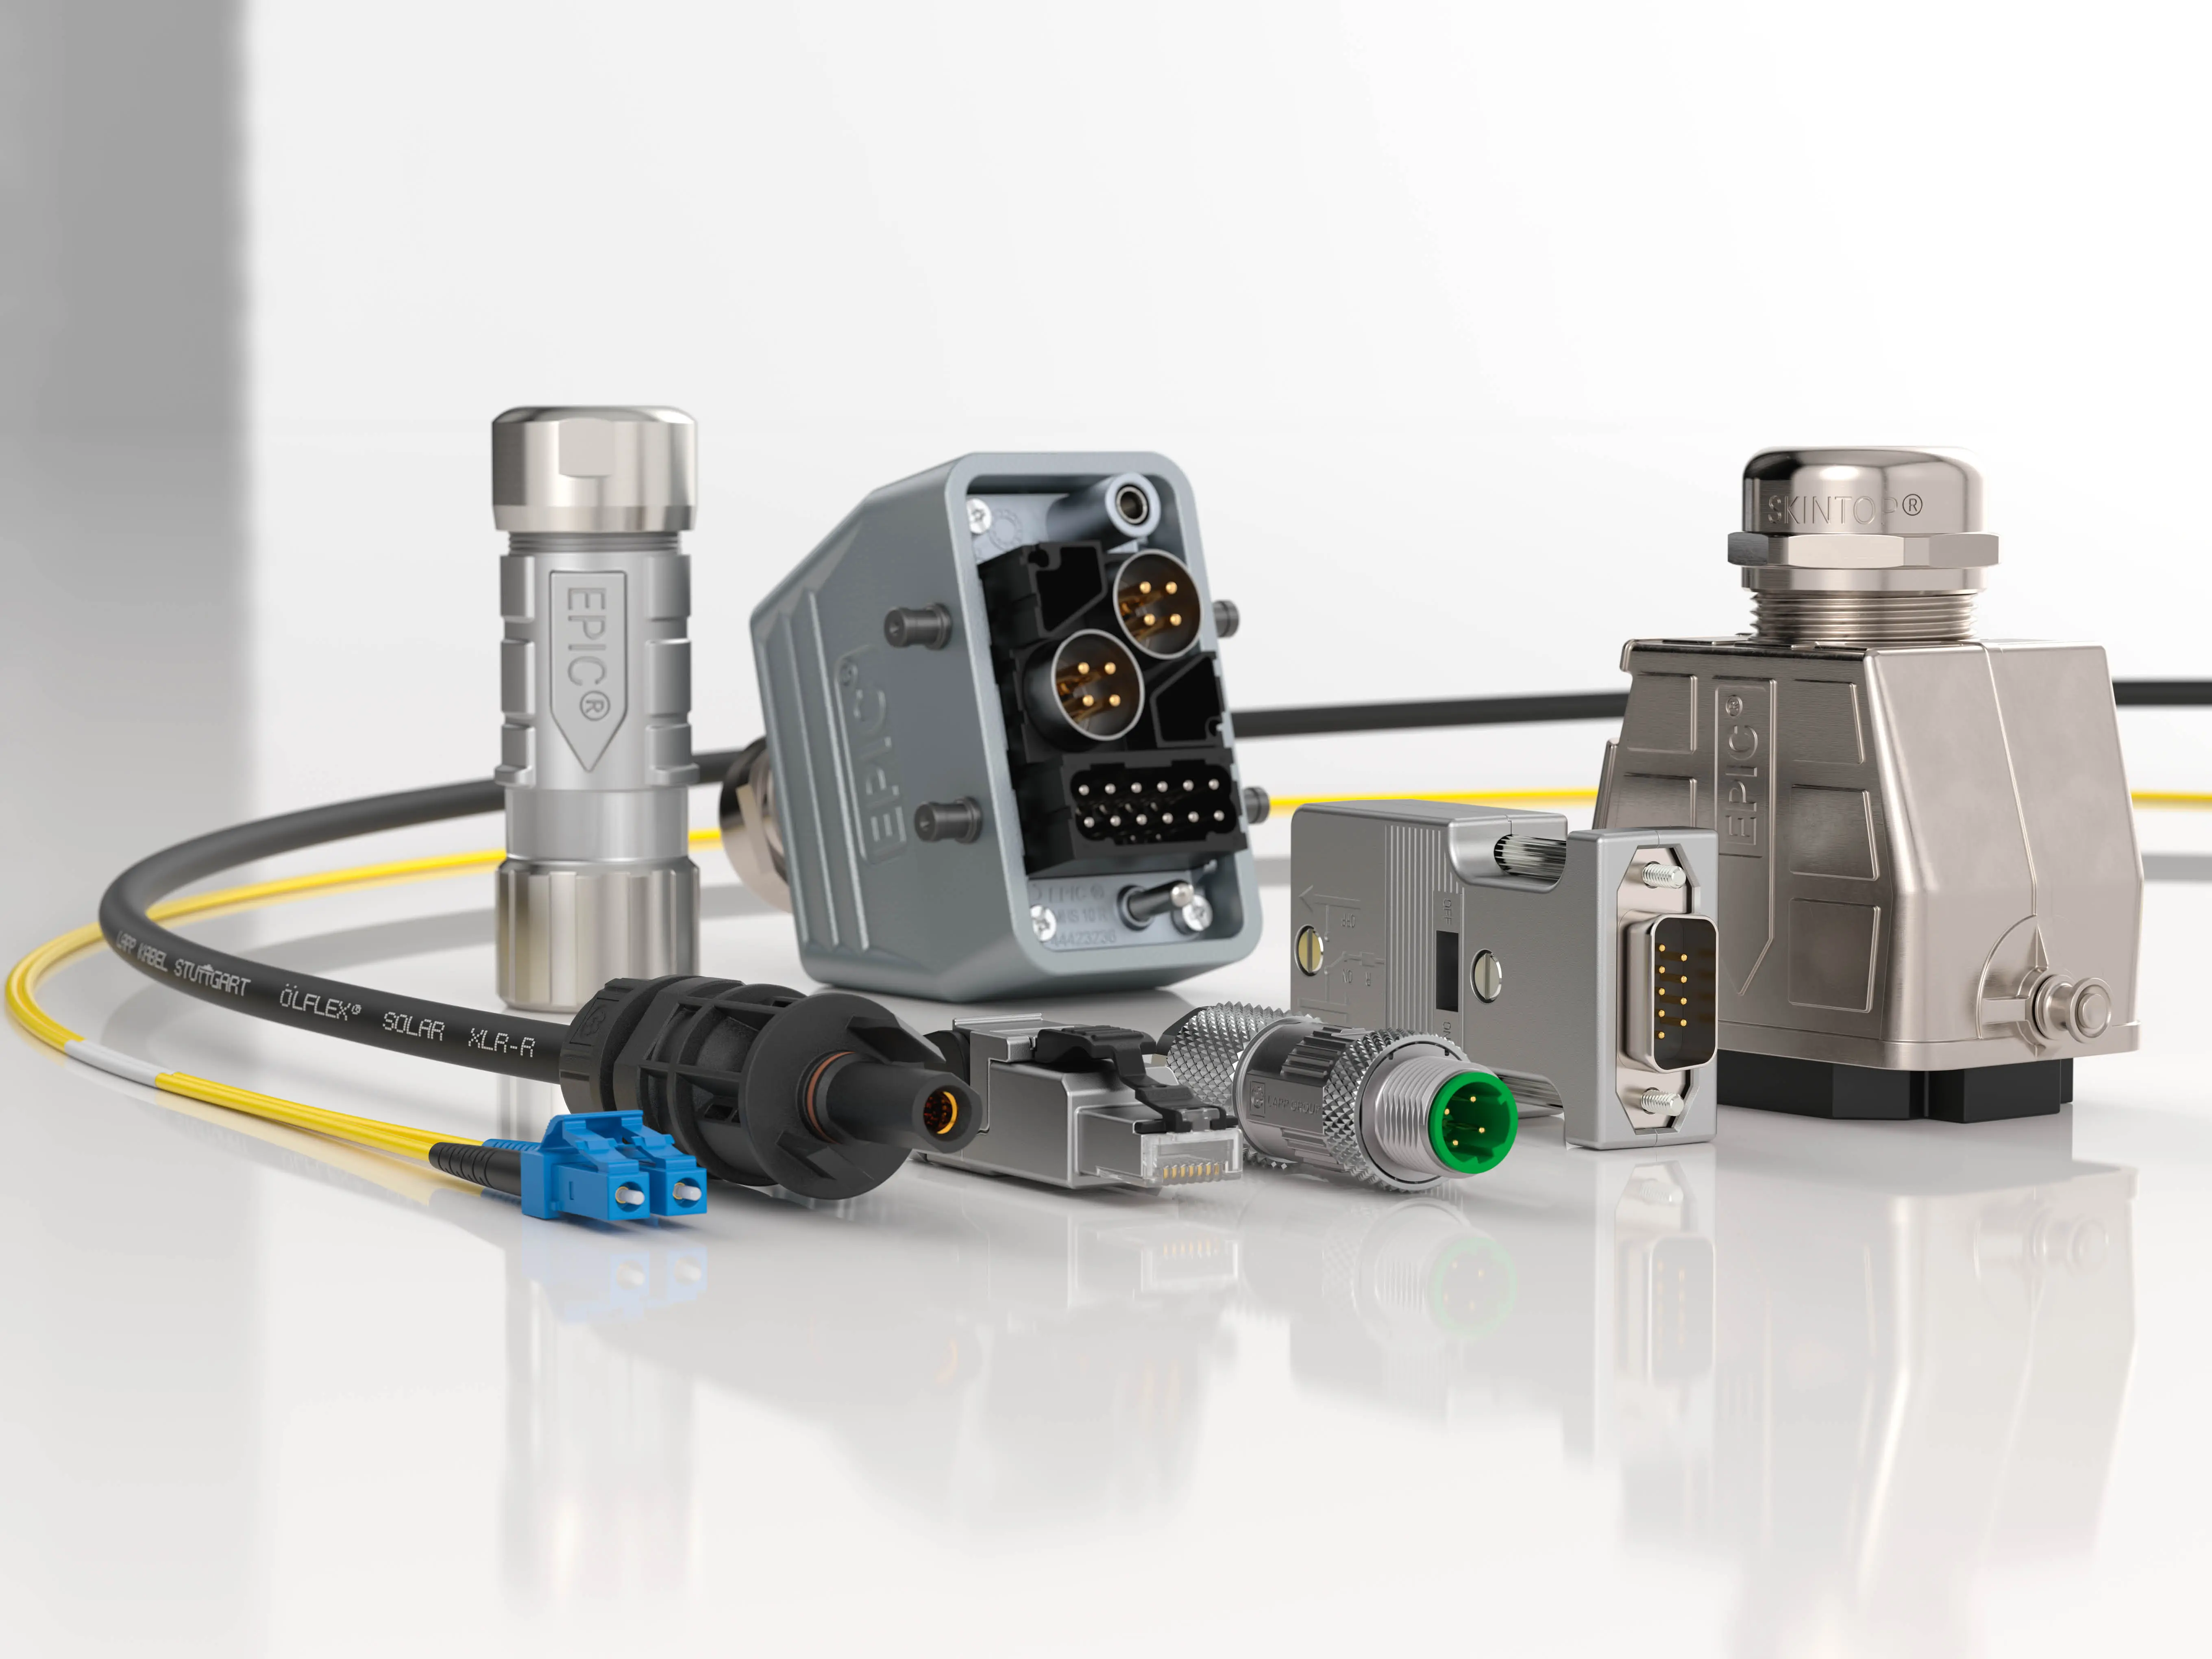 EPIC® industrial connectors from LAPP